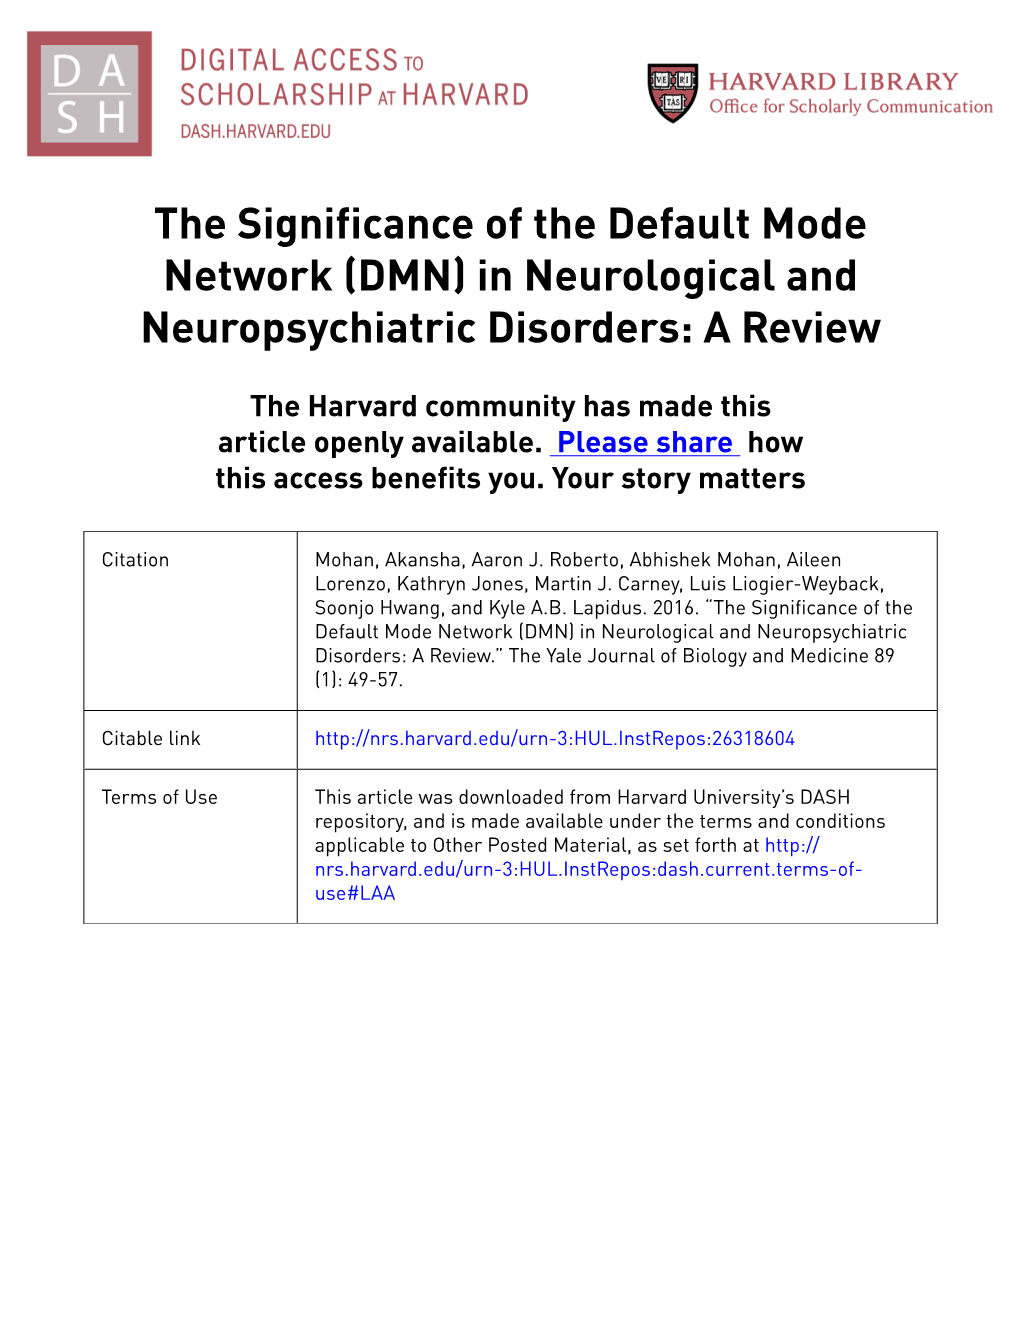 The Significance of the Default Mode Network (DMN) in Neurological and Neuropsychiatric Disorders: a Review